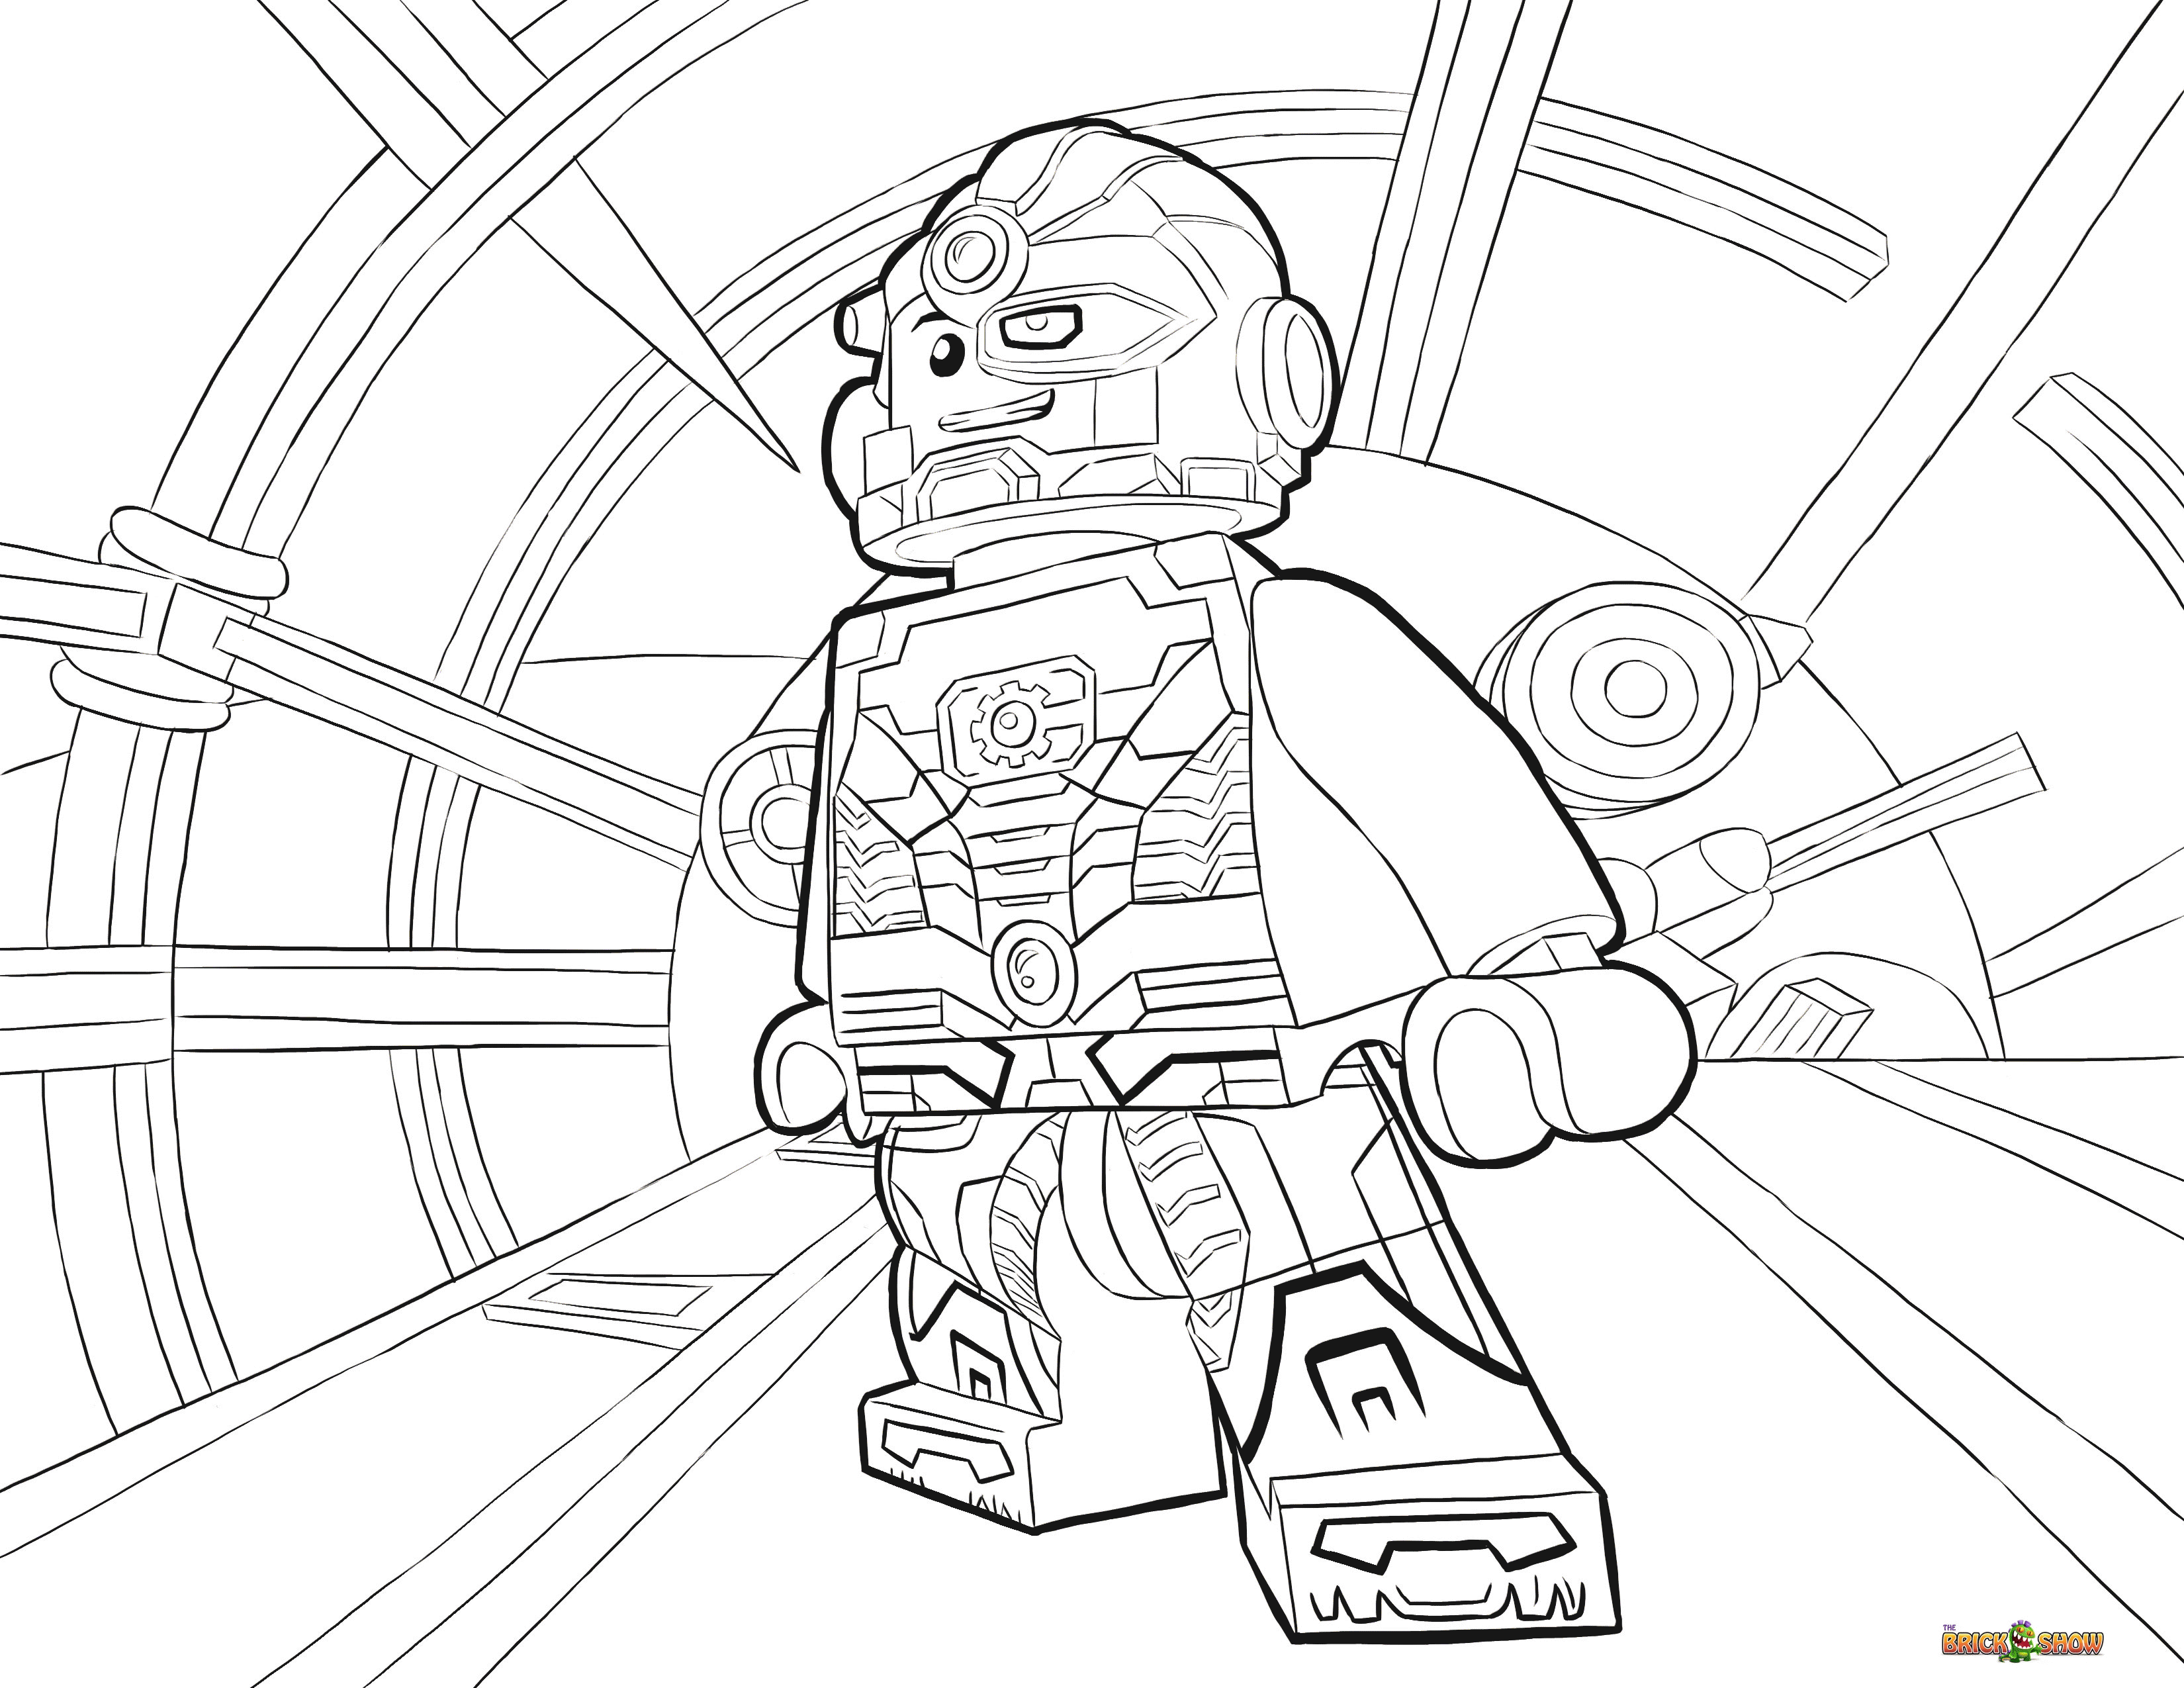 lego superheroes coloring pages similiar lego marvel printable coloring pages keywords superheroes coloring lego pages 